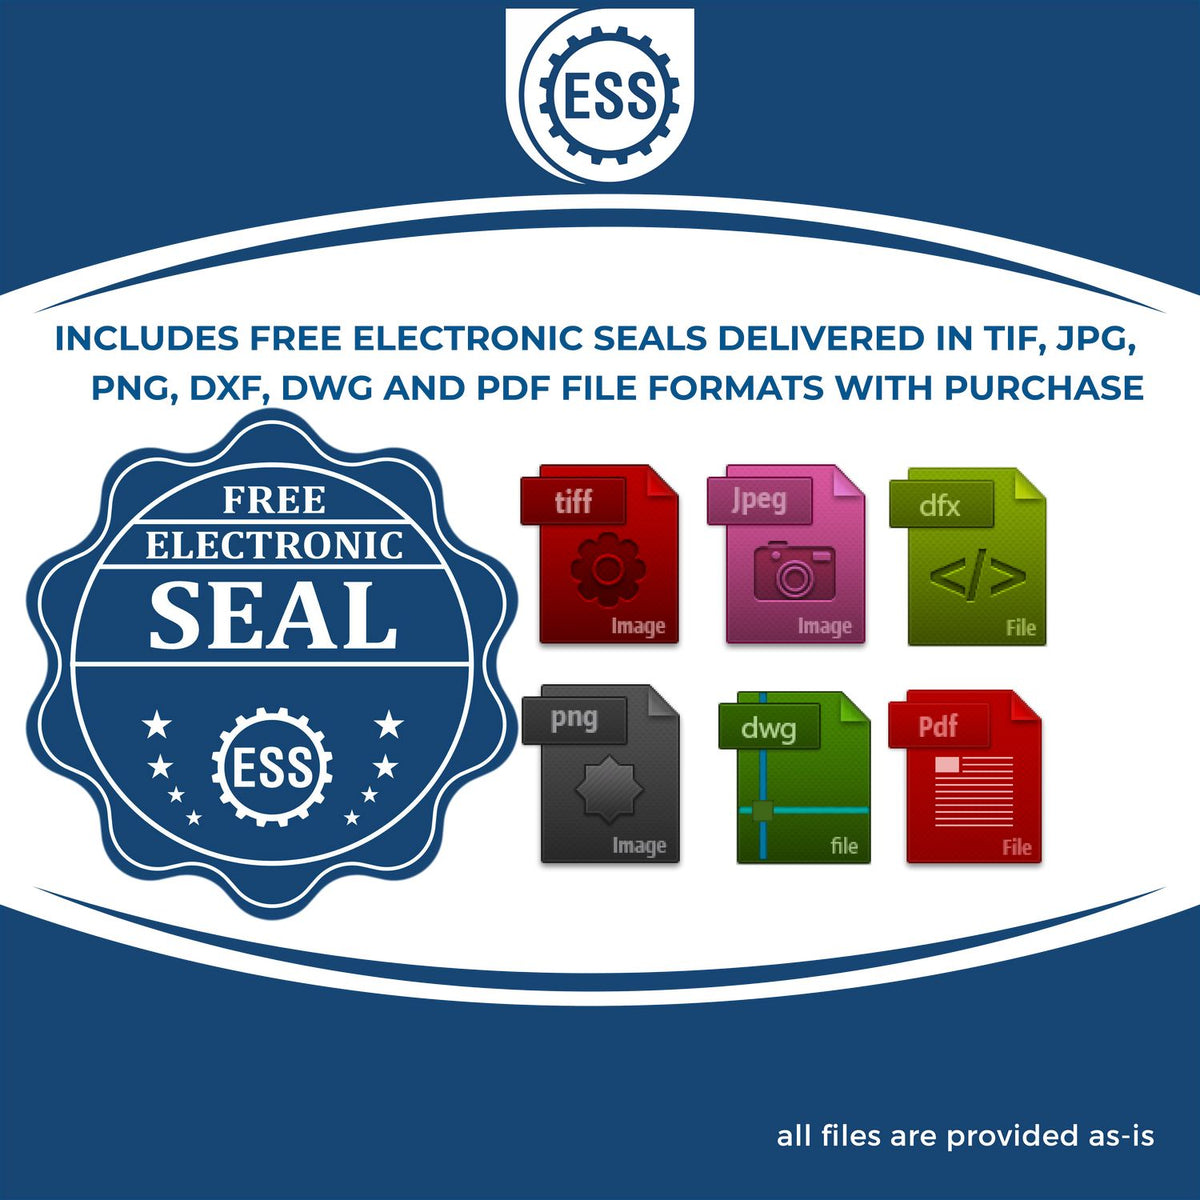 An infographic for the free electronic seal for the Maryland Professional Engineer Seal Stamp illustrating the different file type icons such as DXF, DWG, TIF, JPG and PNG.